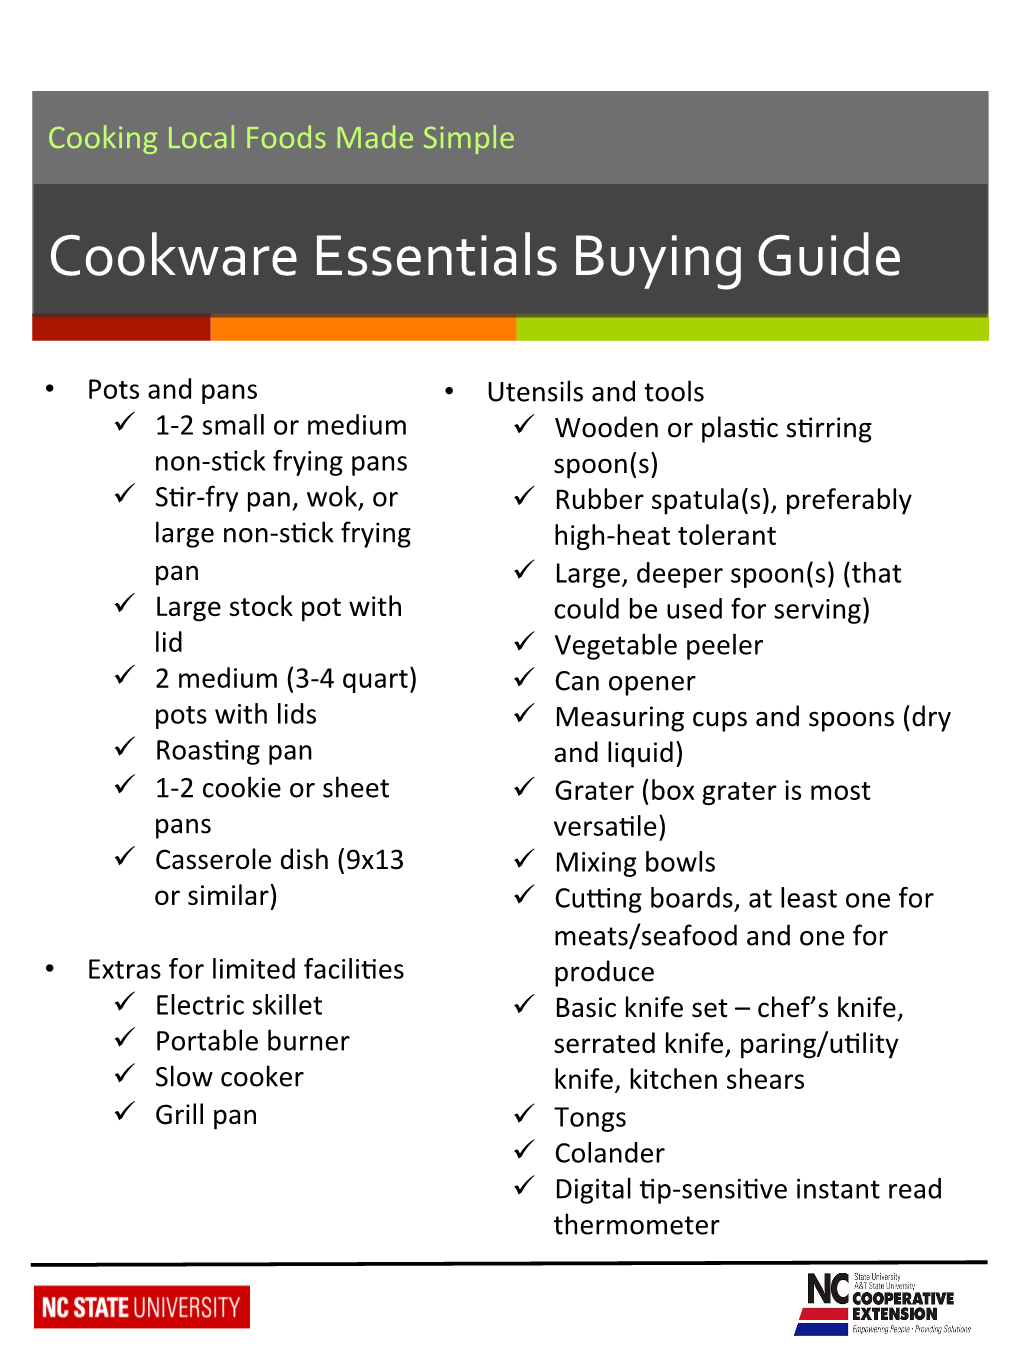 Cookware Essentials Buying Guide